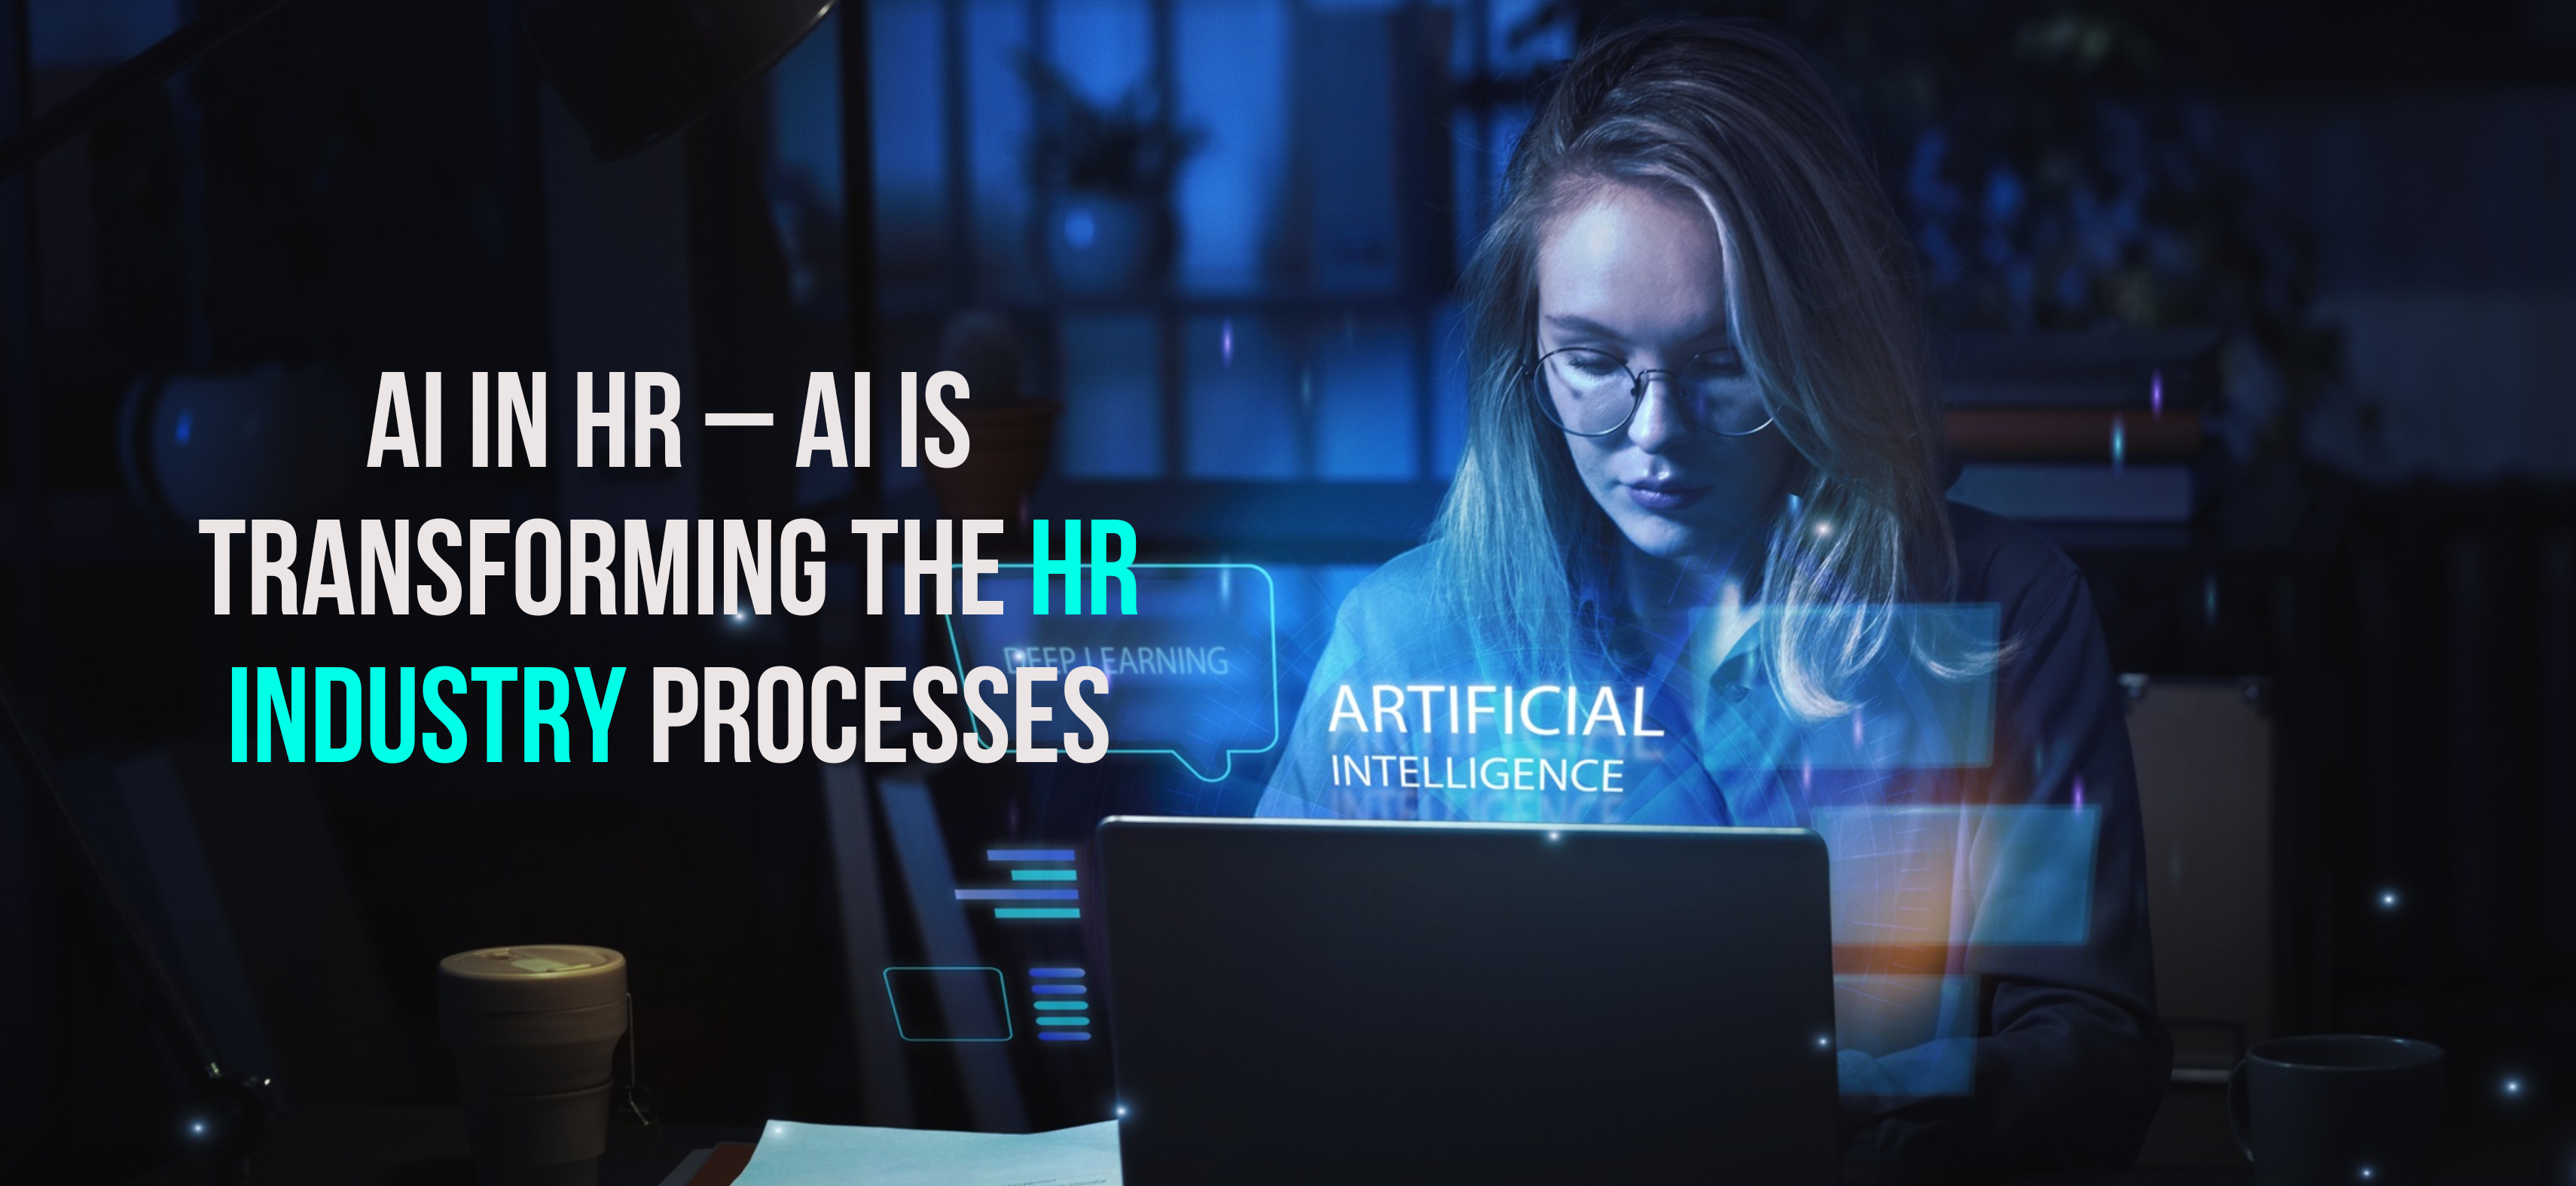 AI in HR – AI is transforming the HR industry processes - Internet Soft